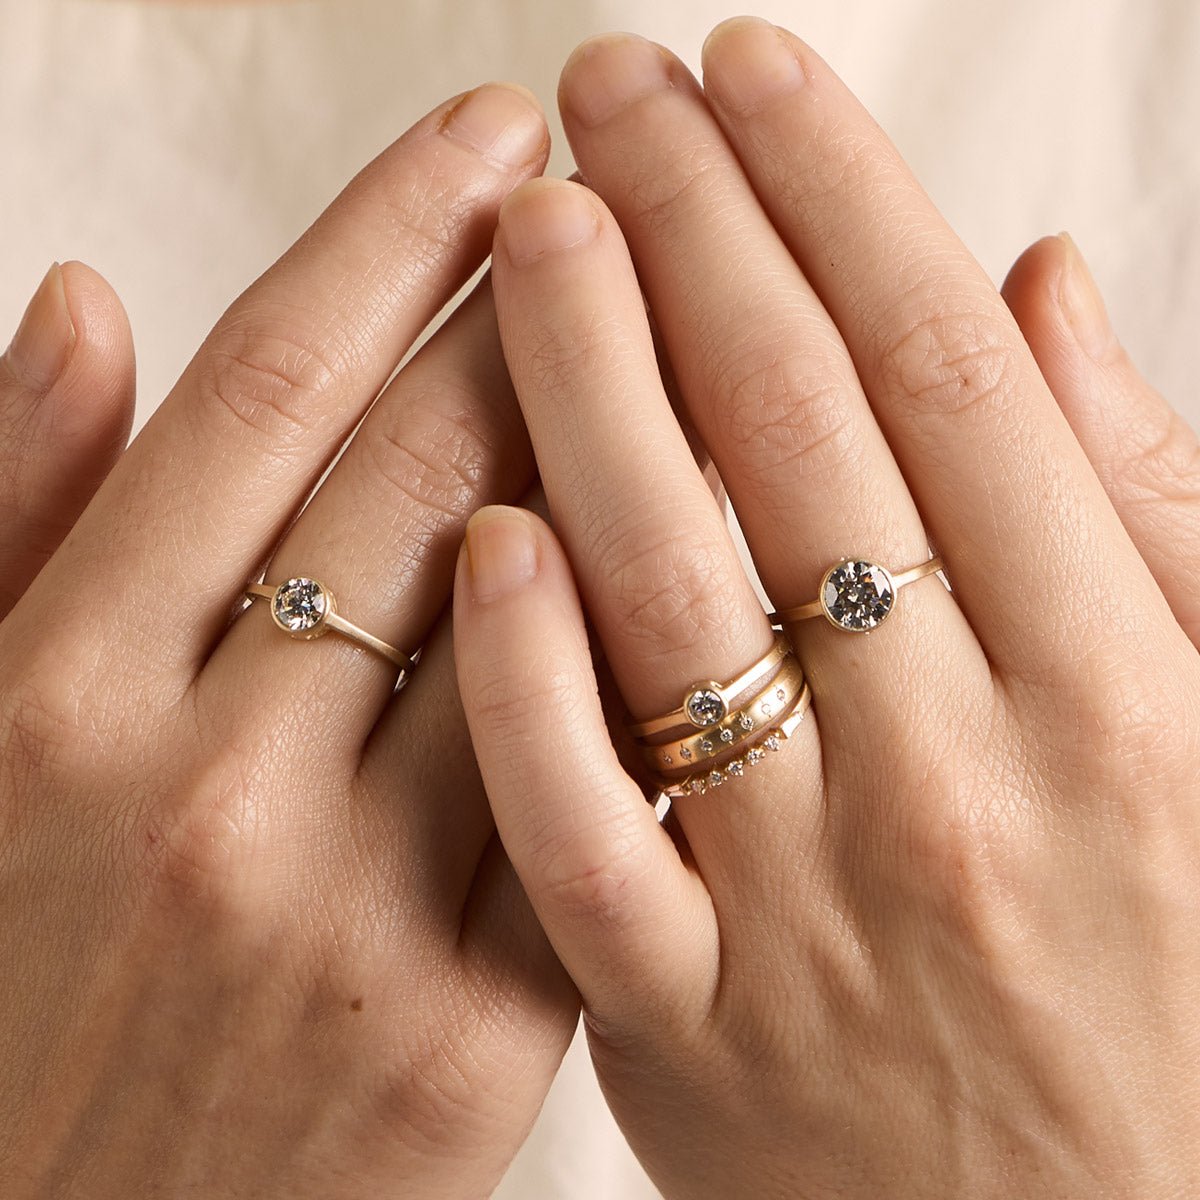 Model wears the Sano rings (from left to right: 0.6 ct, 0.25 ct and 1.4 ct). Model also wears the Aurum and Alma rings.